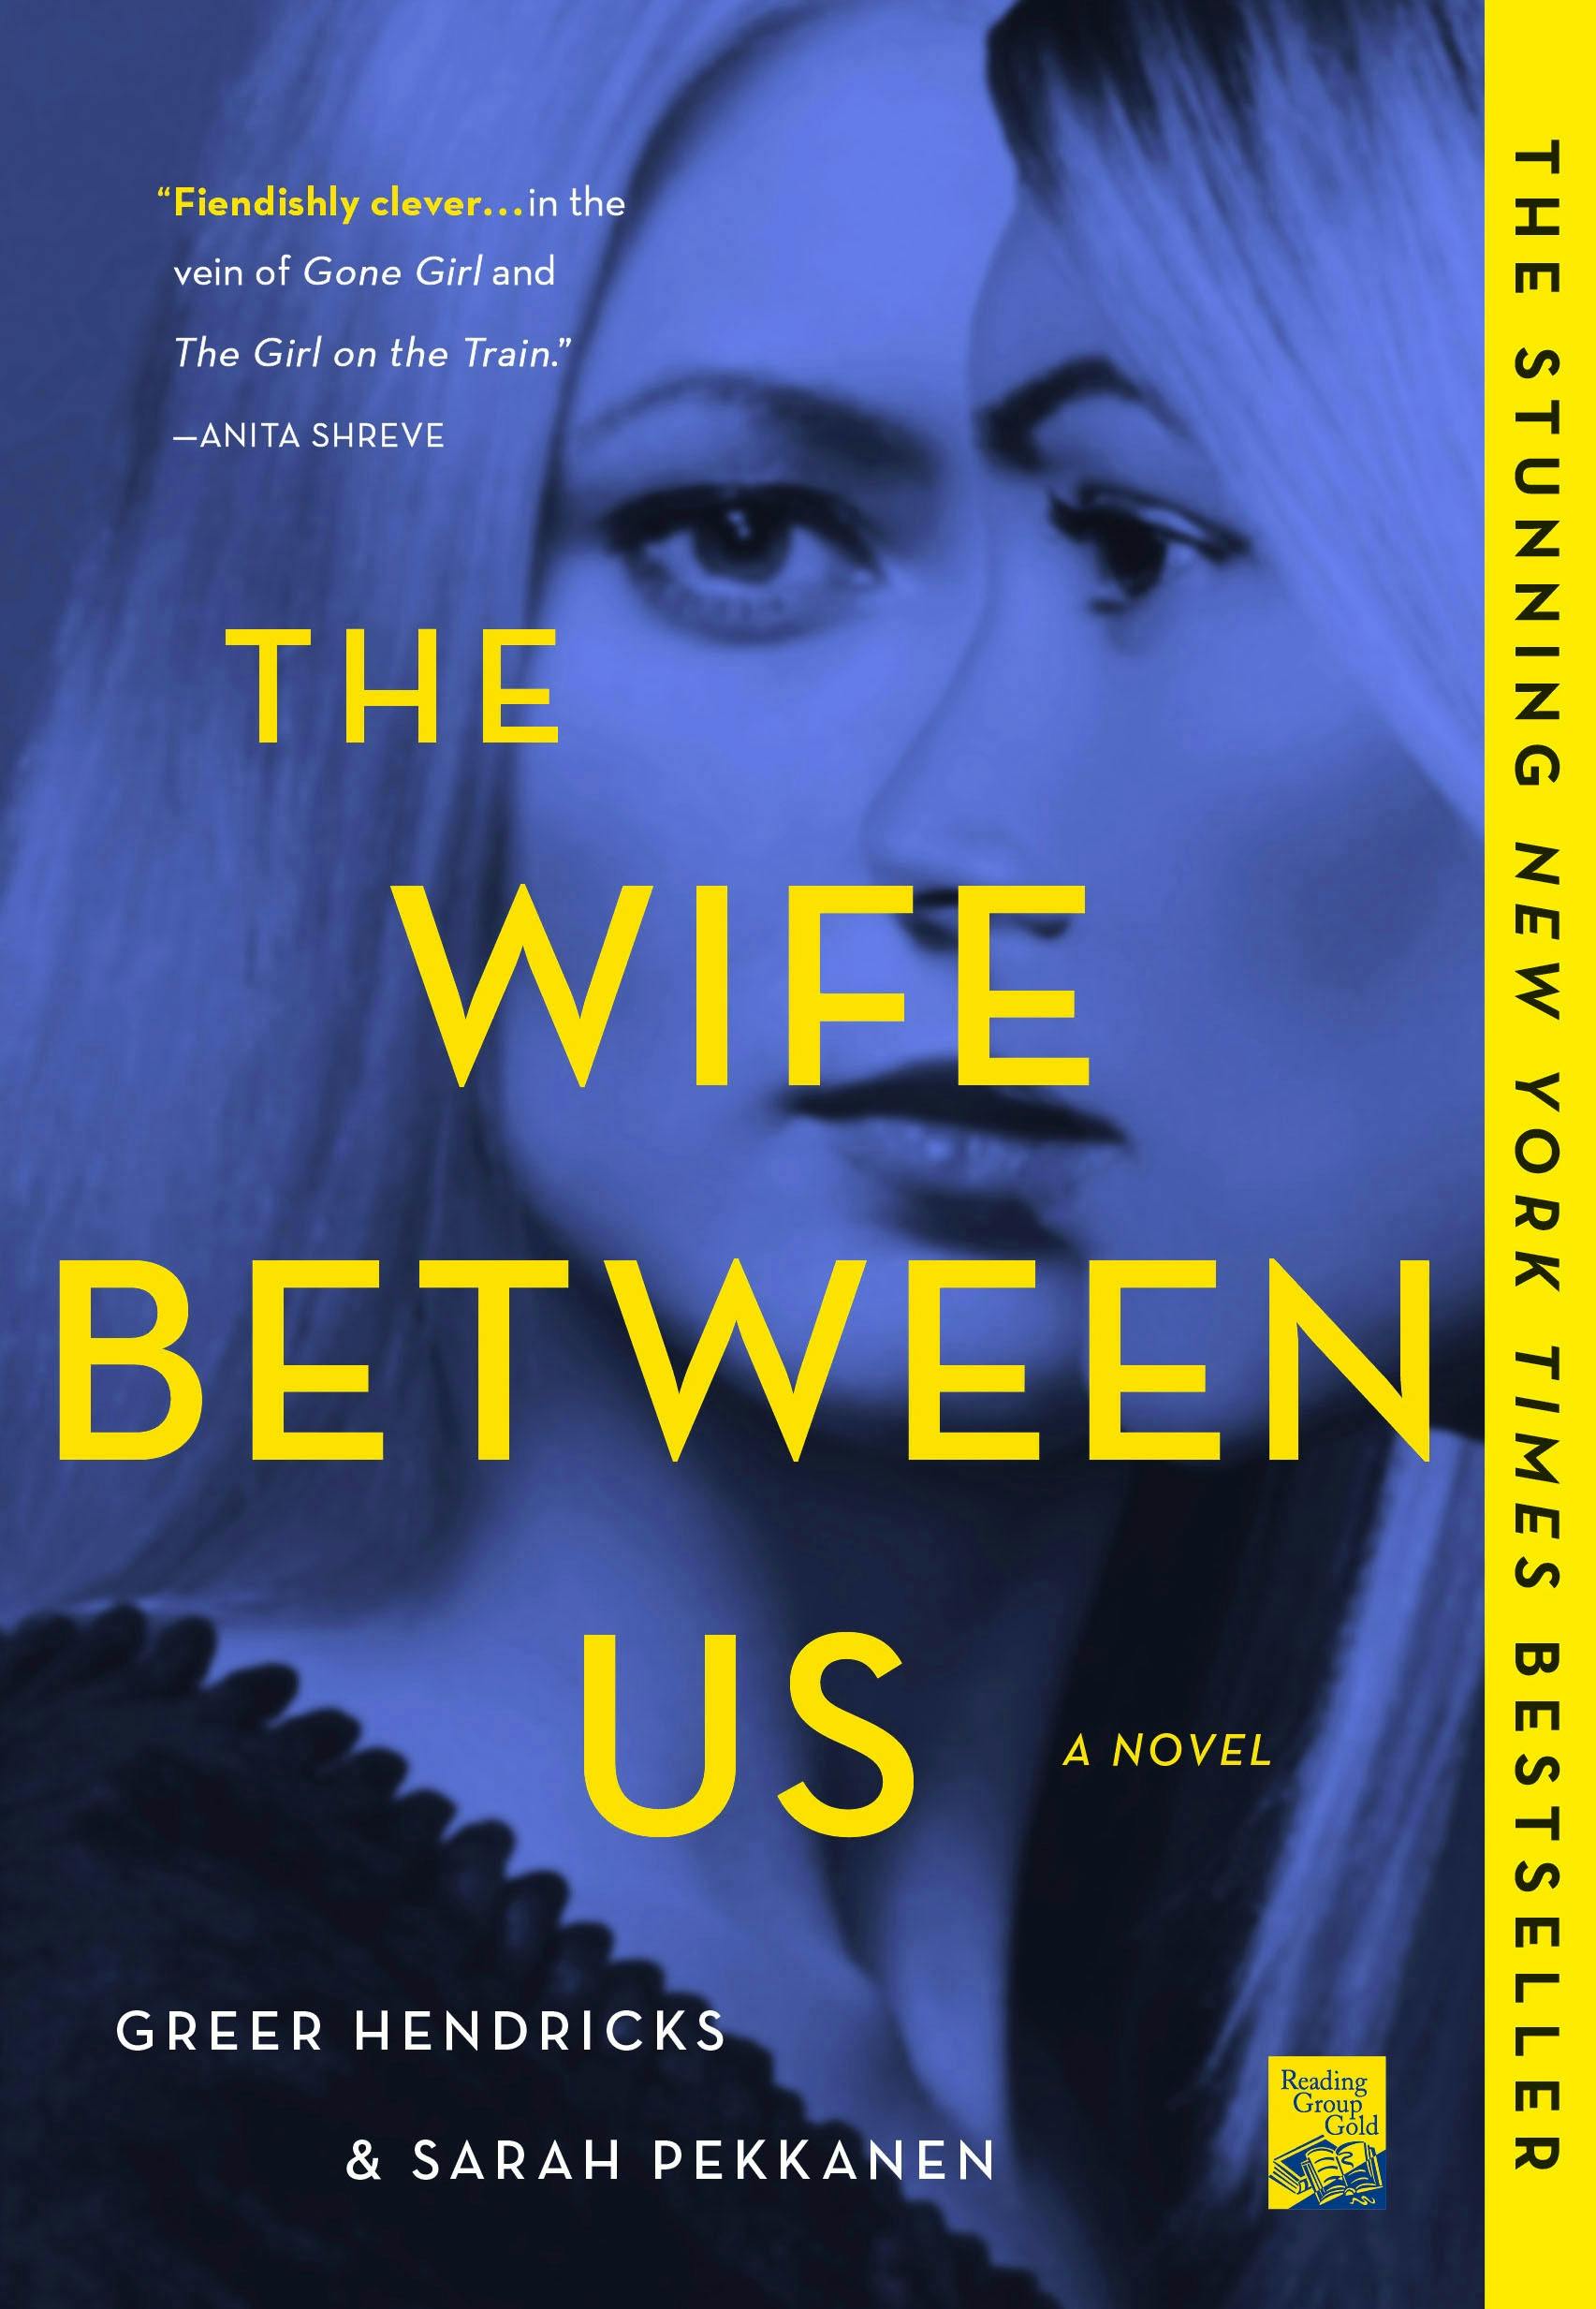 The Wife Book